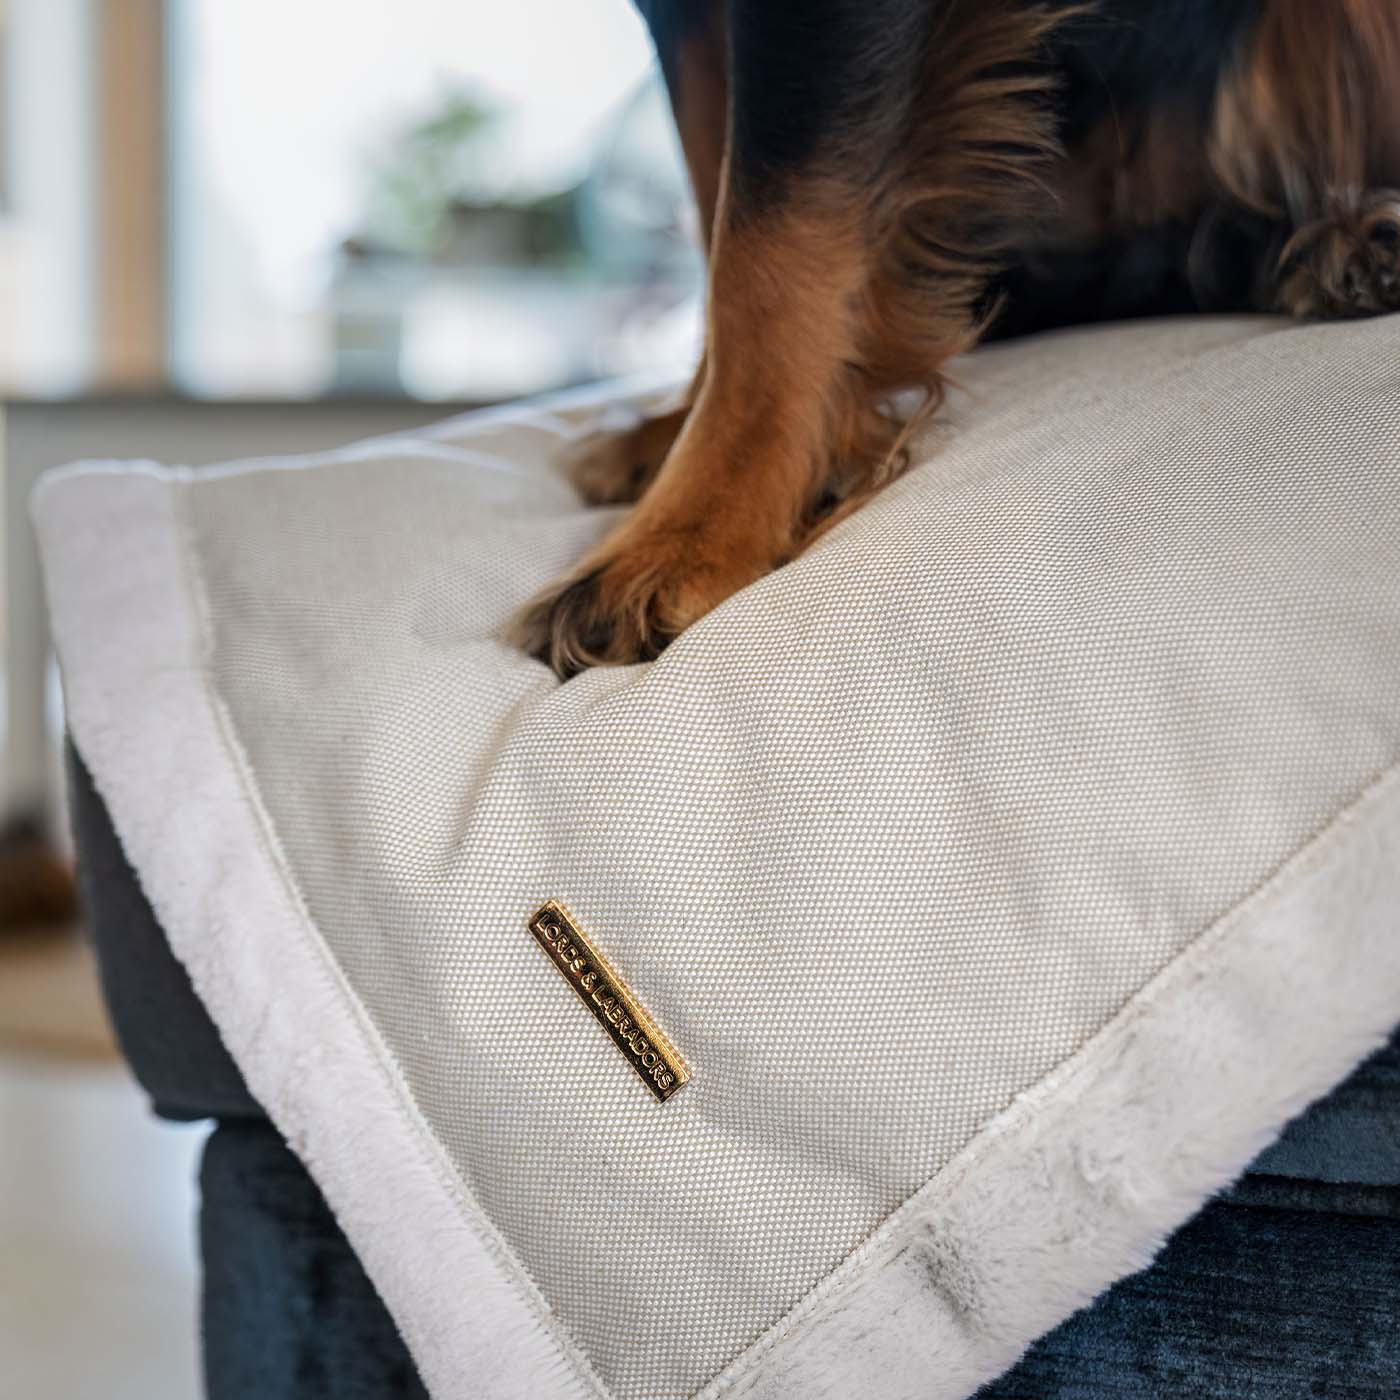 Present your furry friend with our luxuriously thick, plush blanket for your pet. Featuring a reverse side with hardwearing woven fabric handmade in Italy for the perfect high-quality pet blanket! Essentials Twill Blanket In Linen, Available now at Lords & Labradors US